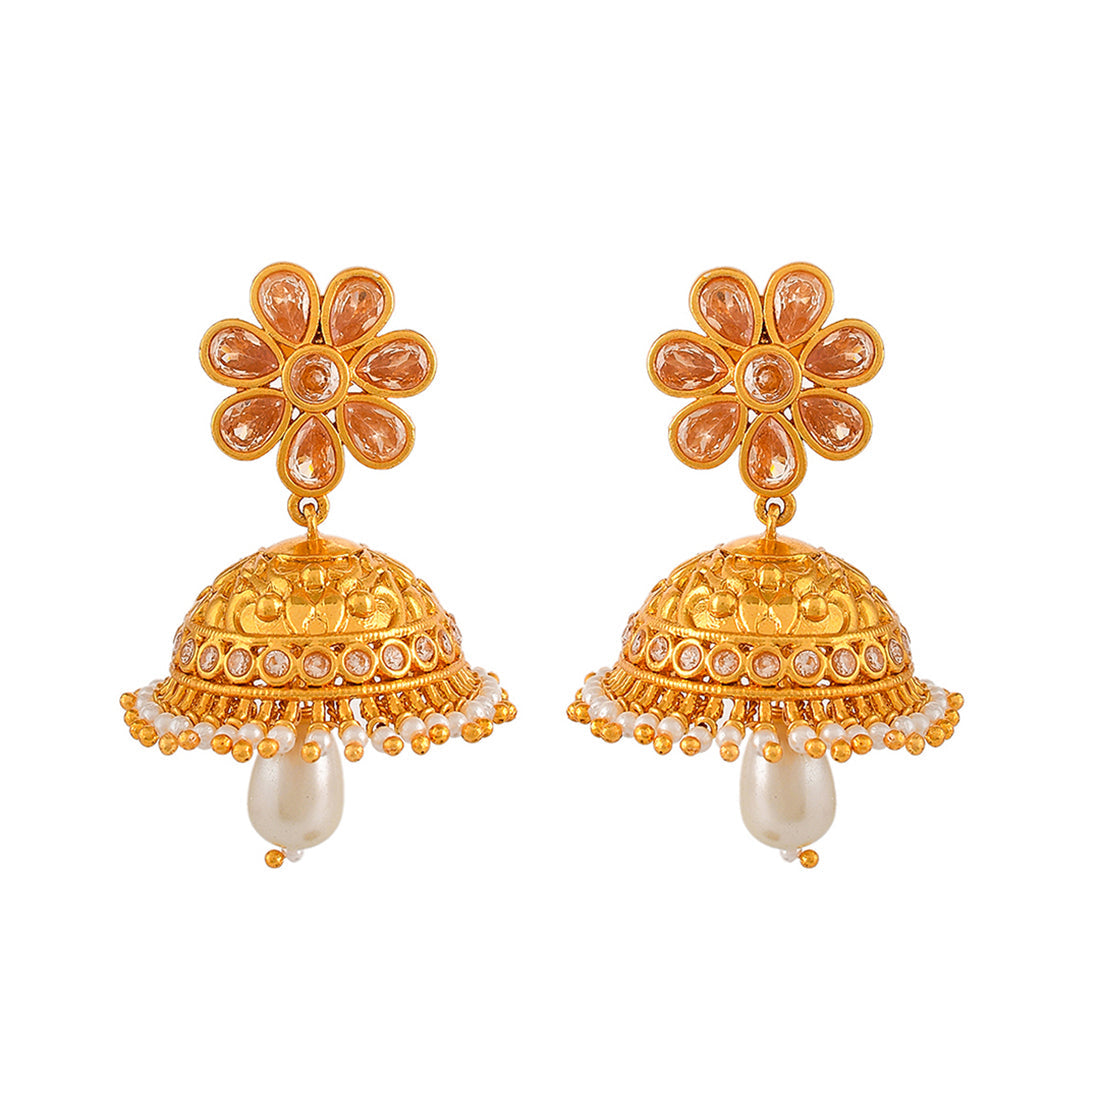 Women's Abharan White Stones And Pearls Floral Jhumka Earrings - Voylla